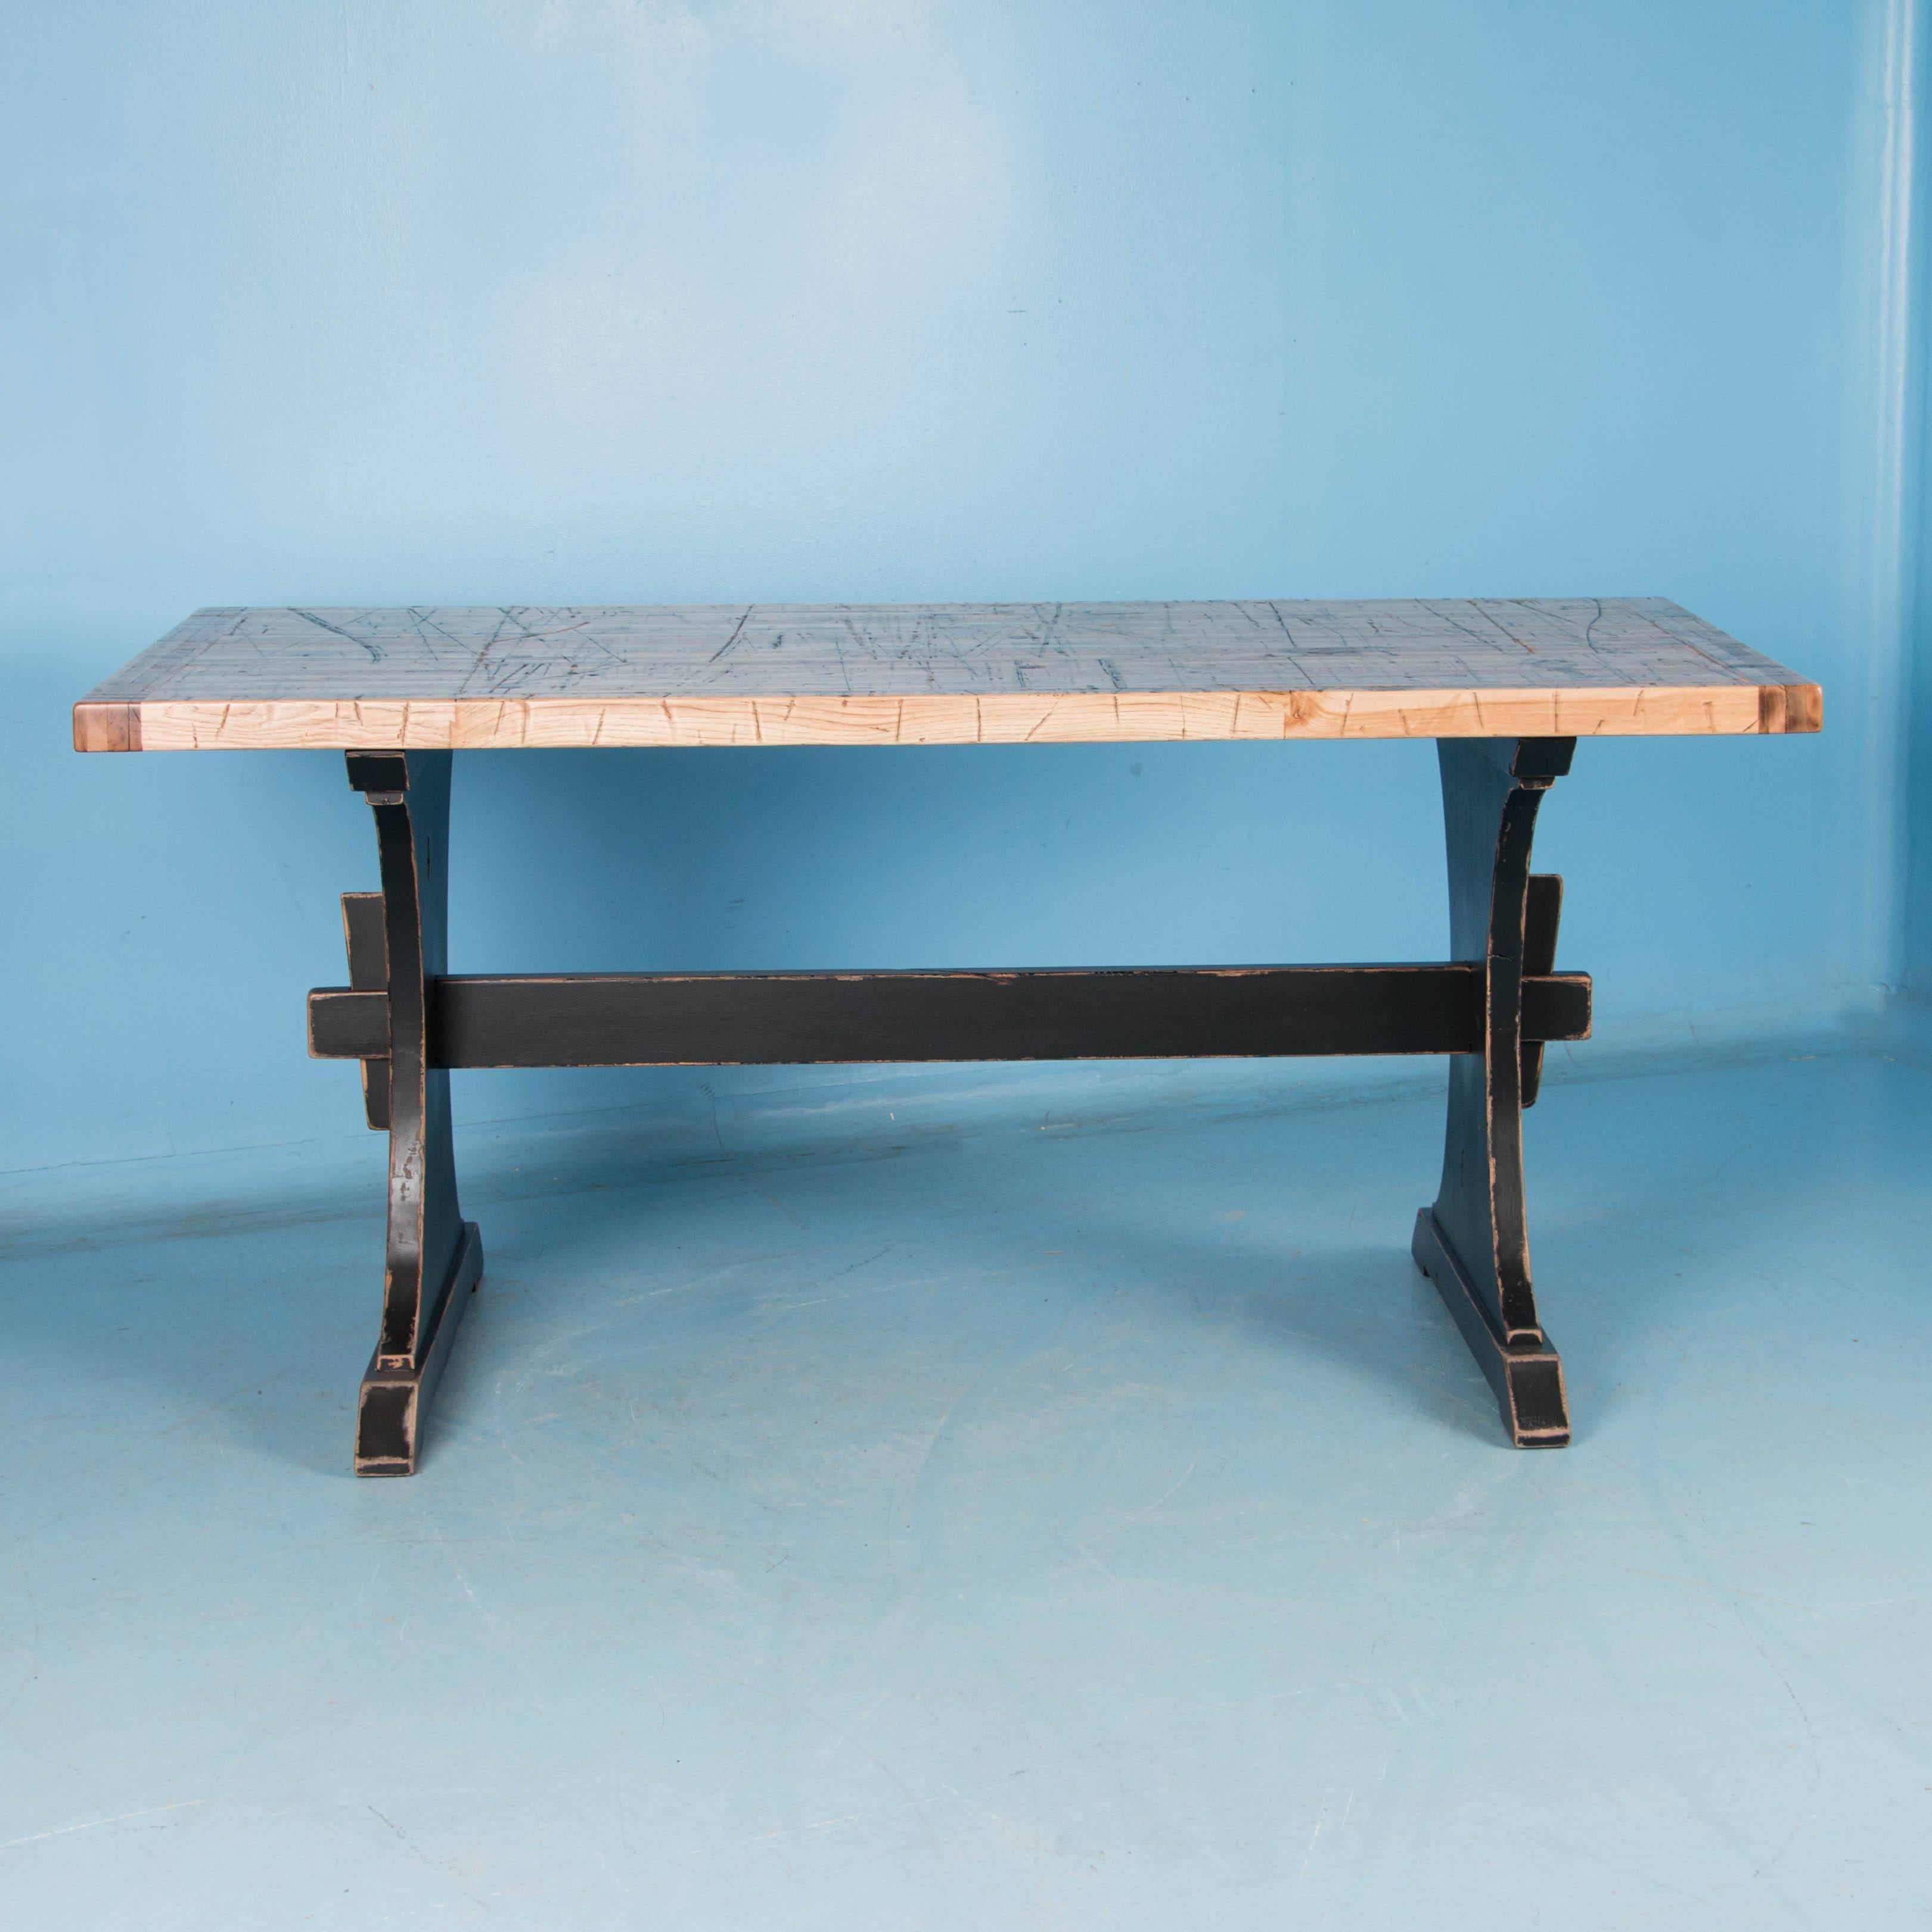 This unique counter height dining table was custom-made using reclaimed maple boxcar flooring. The distressed wood is a result of years of moving cargo through the train’s boxcars; it has been sanded and given a hard finish for daily use. Not only